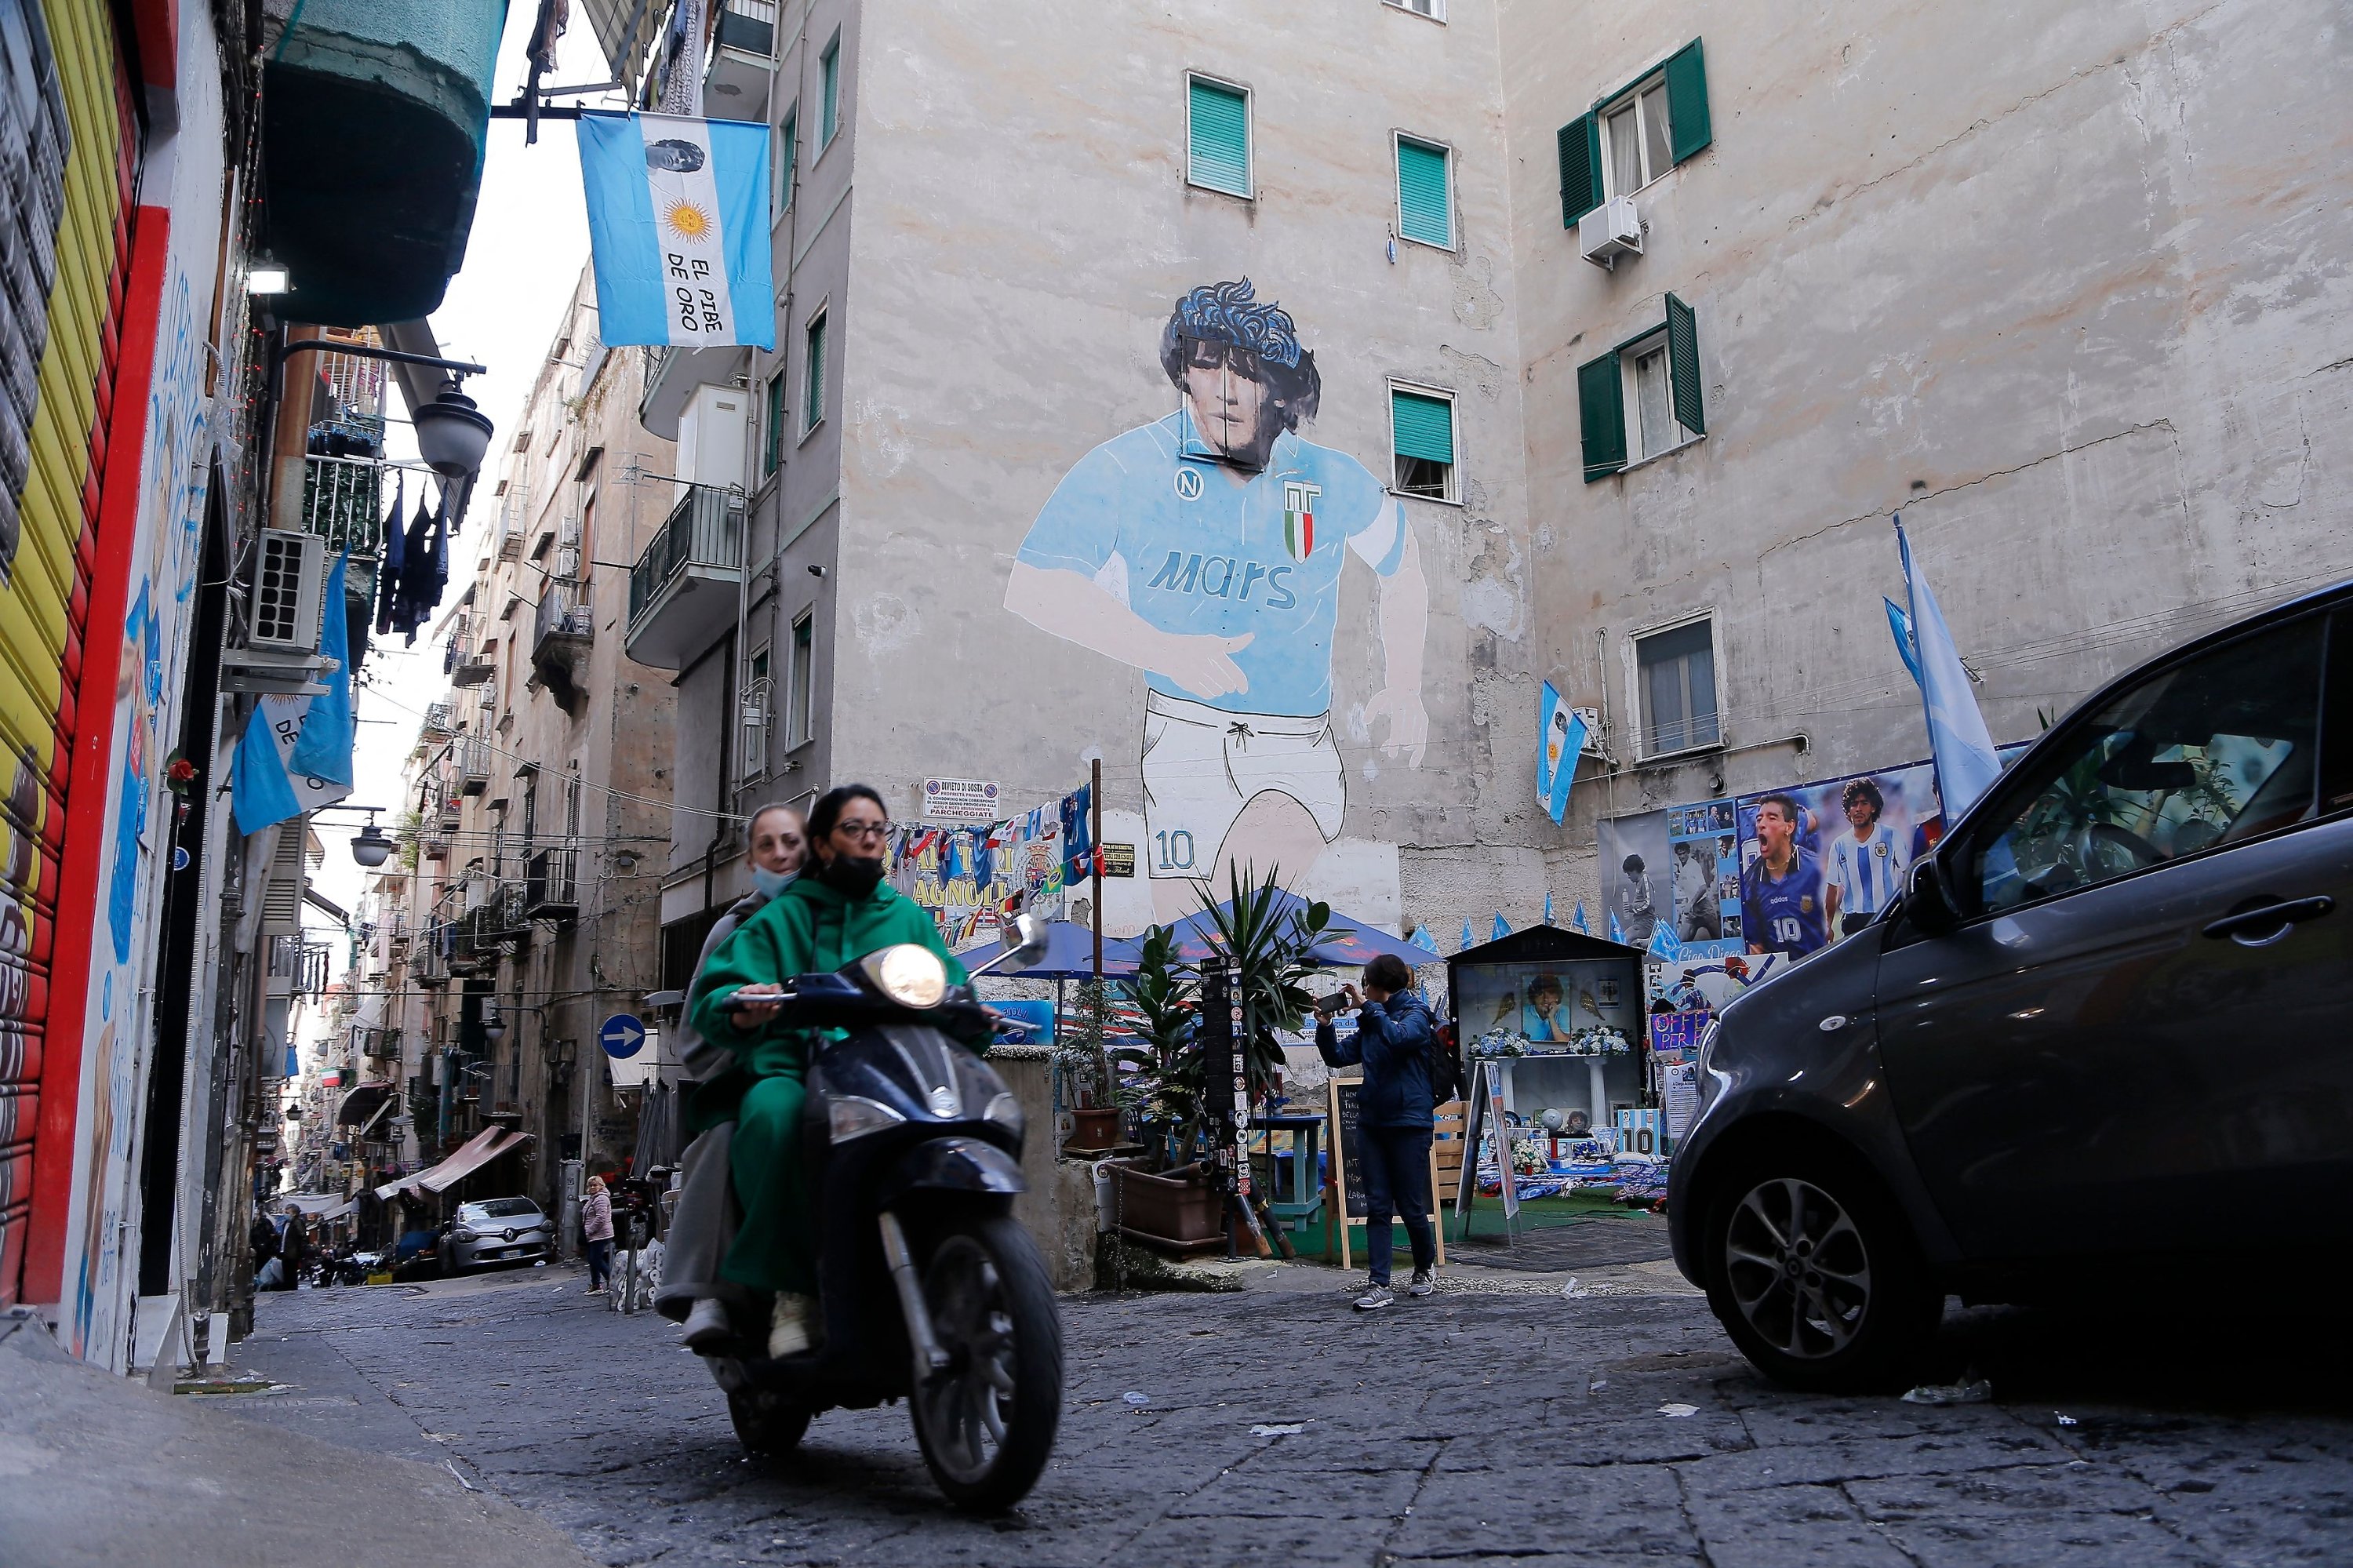 A scooter drives past a mural painting of late Argentinian football legend Diego Maradona in the Spanish Quarters, Naples, Italy, Nov. 23, 2021. (AFP Photo)